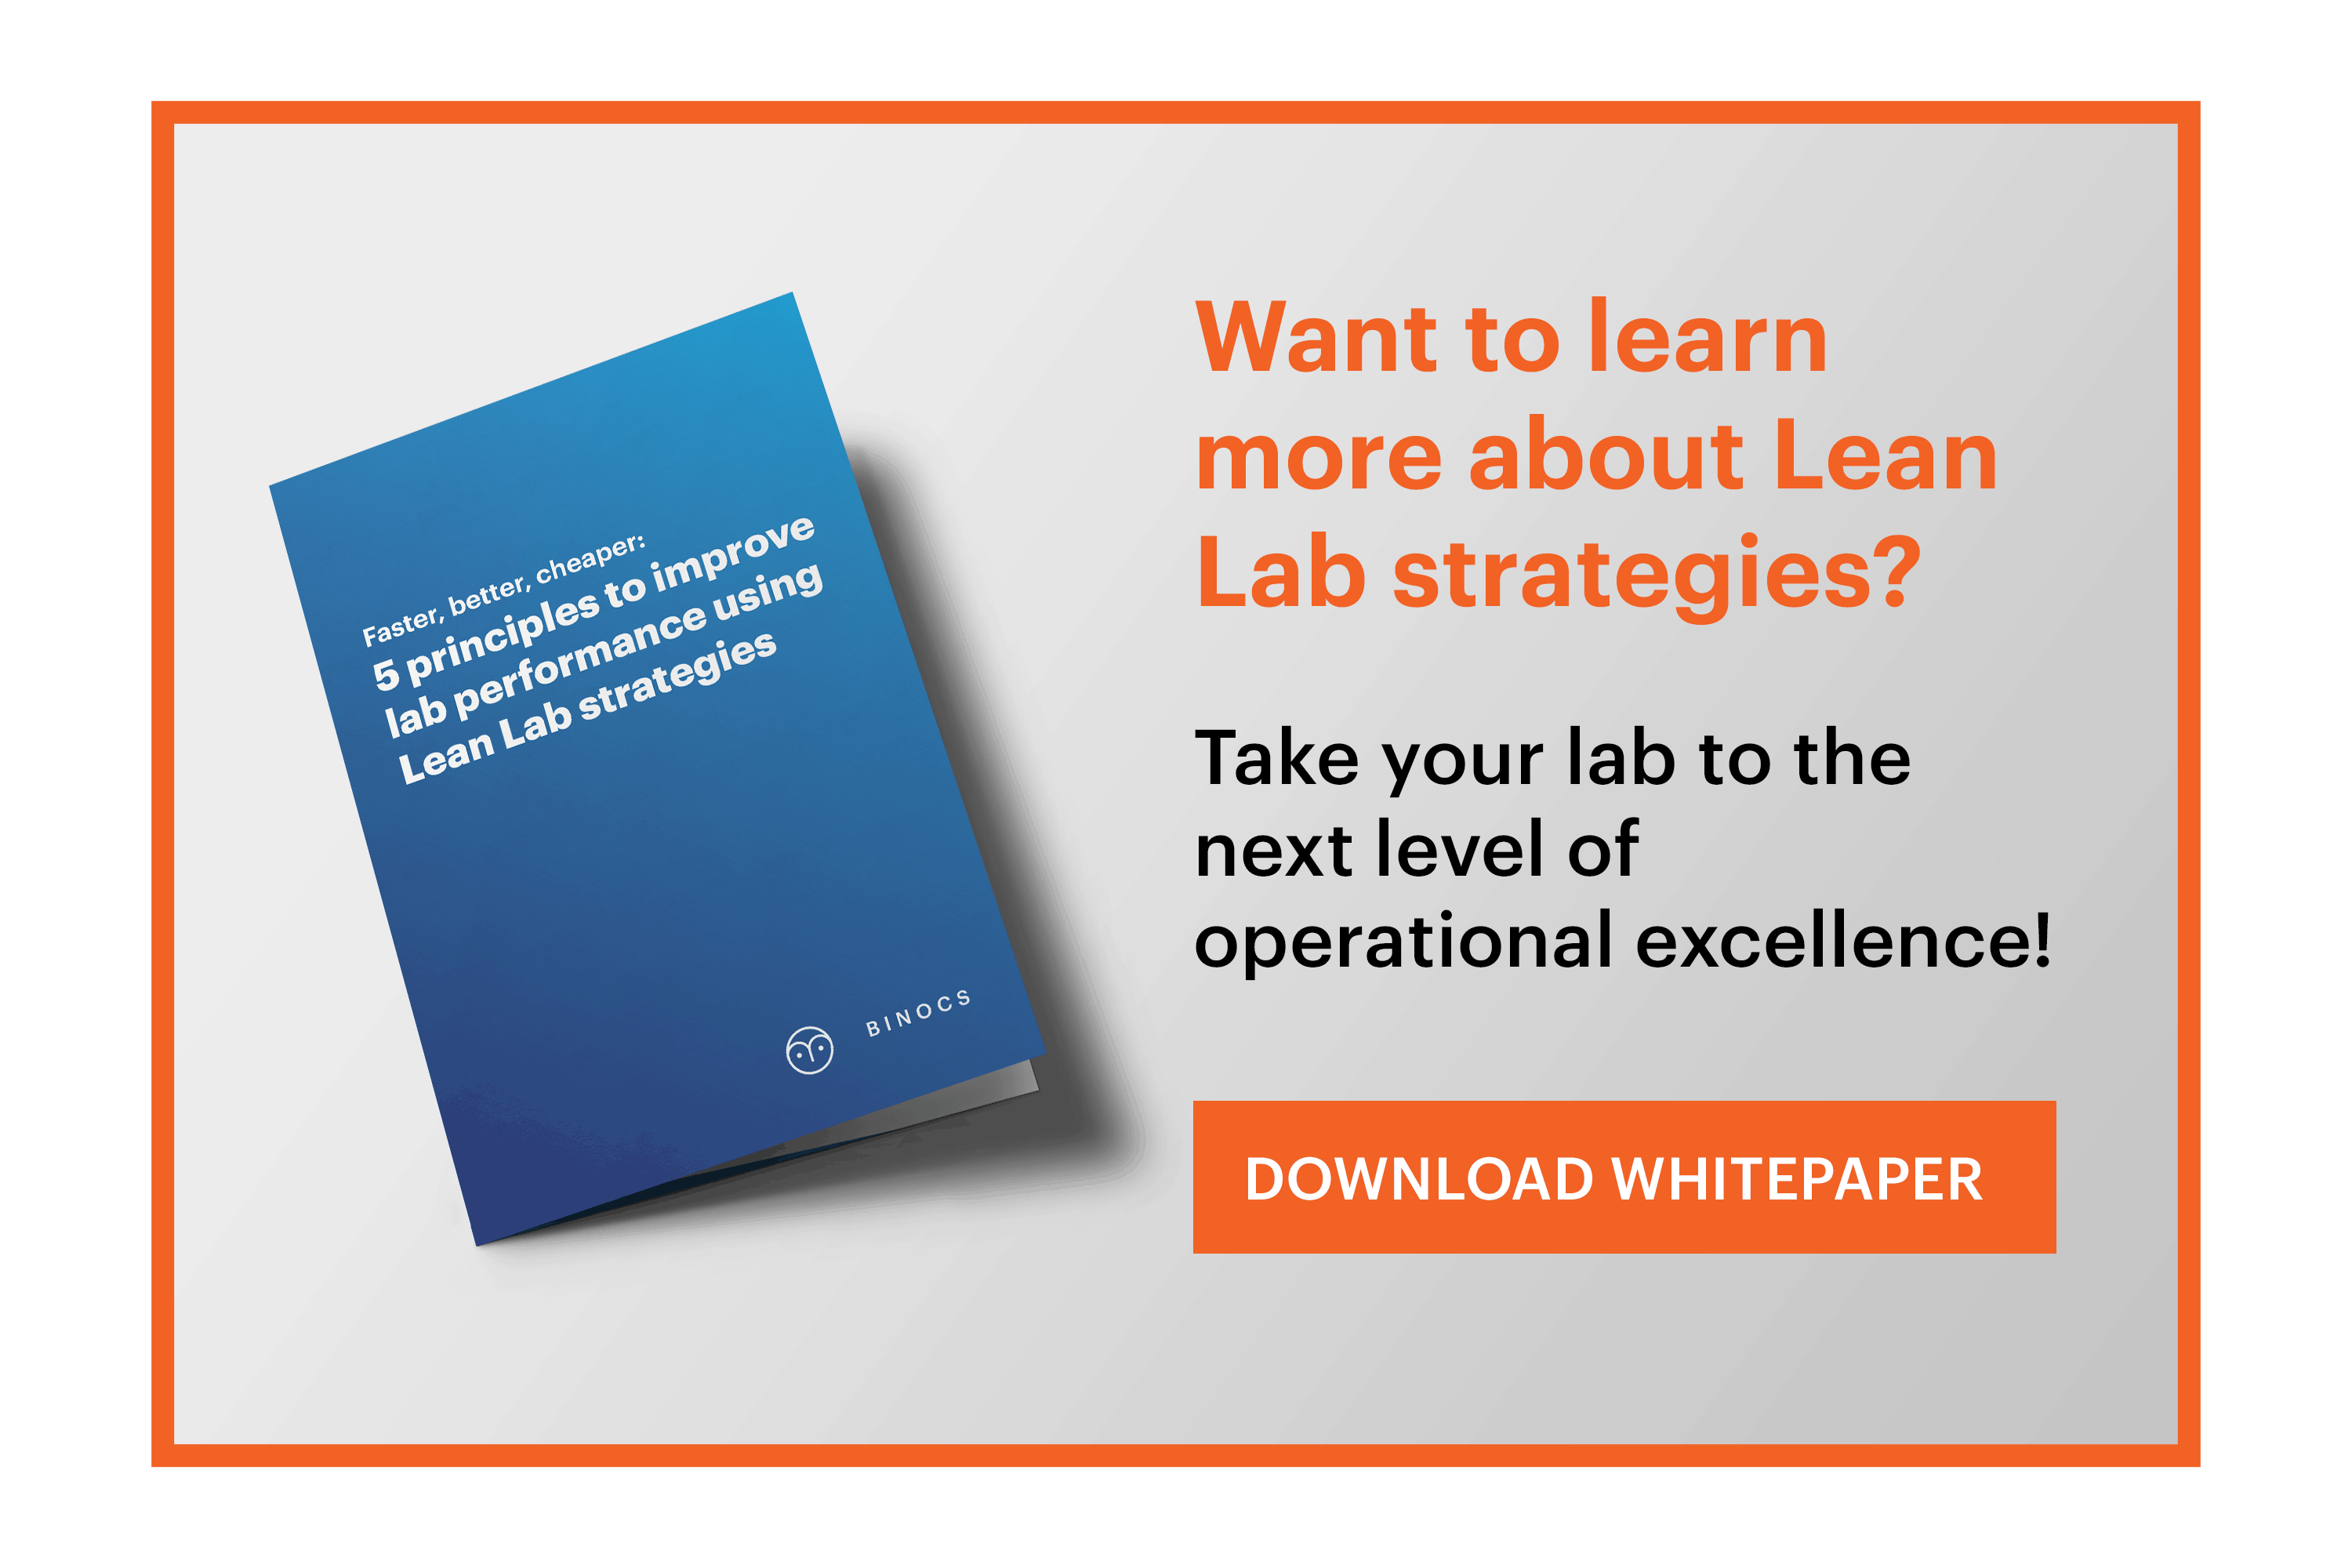 Download our whitepaper - 5 principles to improve lab performance using lean lab strategies